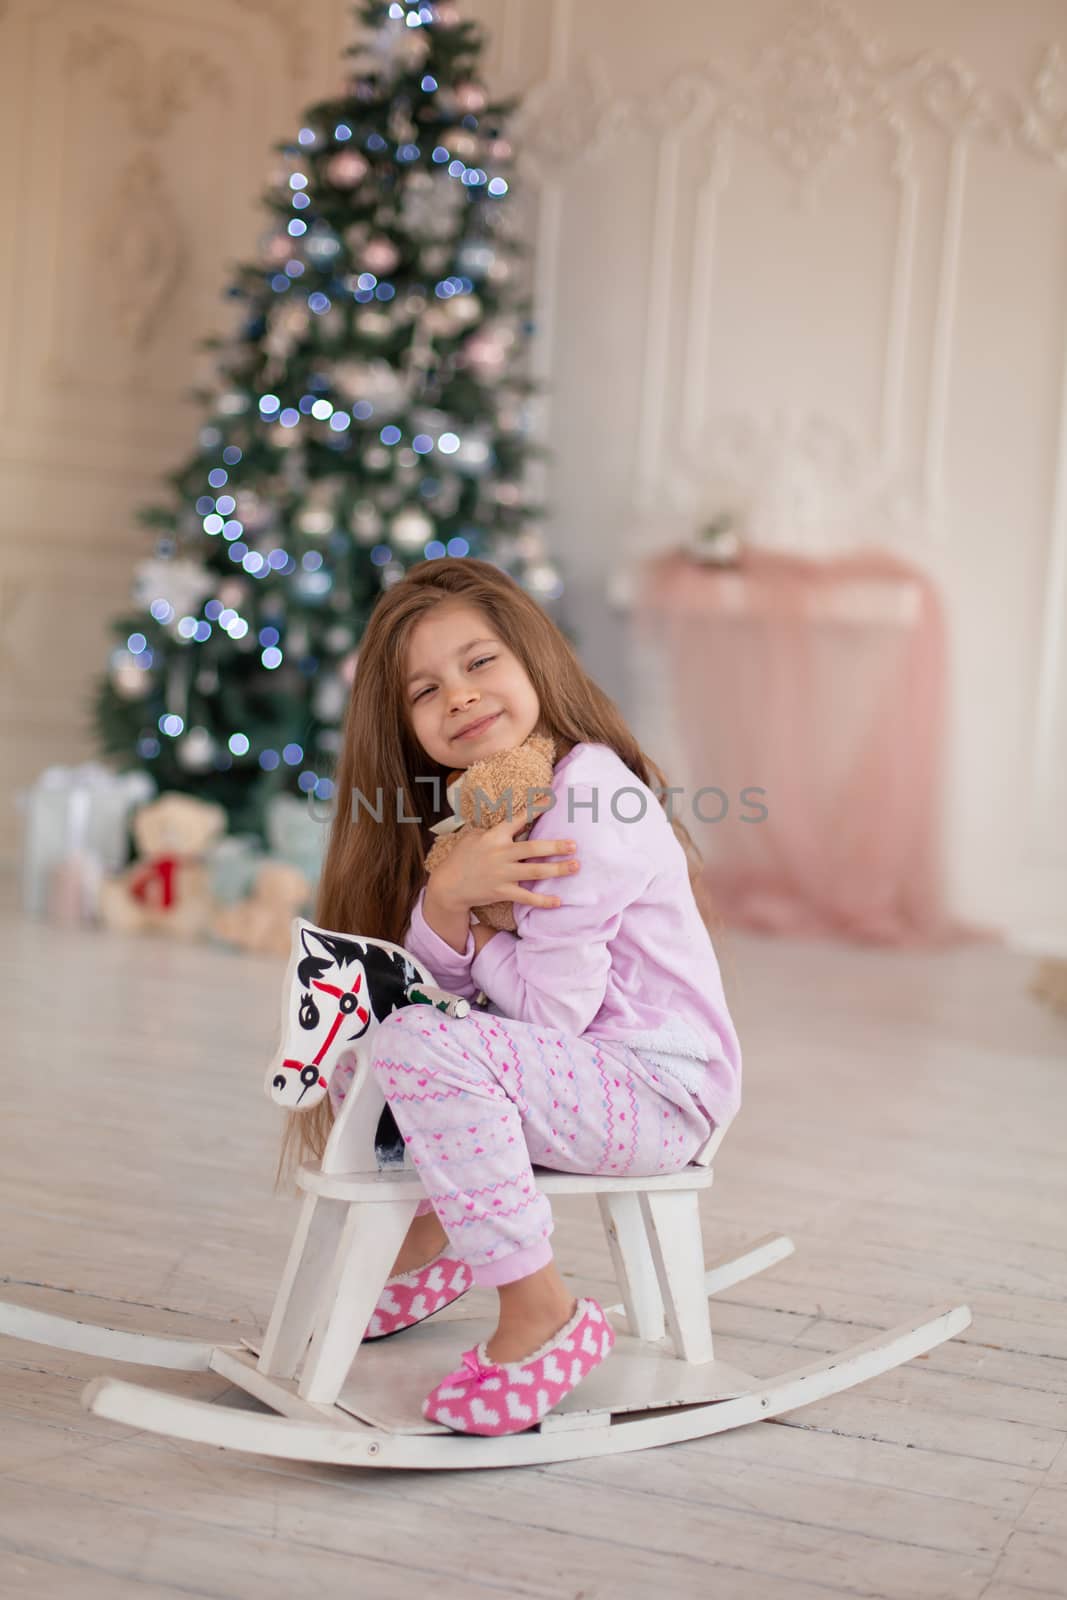 A beautiful little girl in pink pajamas rejoices in a wooden rocking horse, a gift from Santa for Christmas.